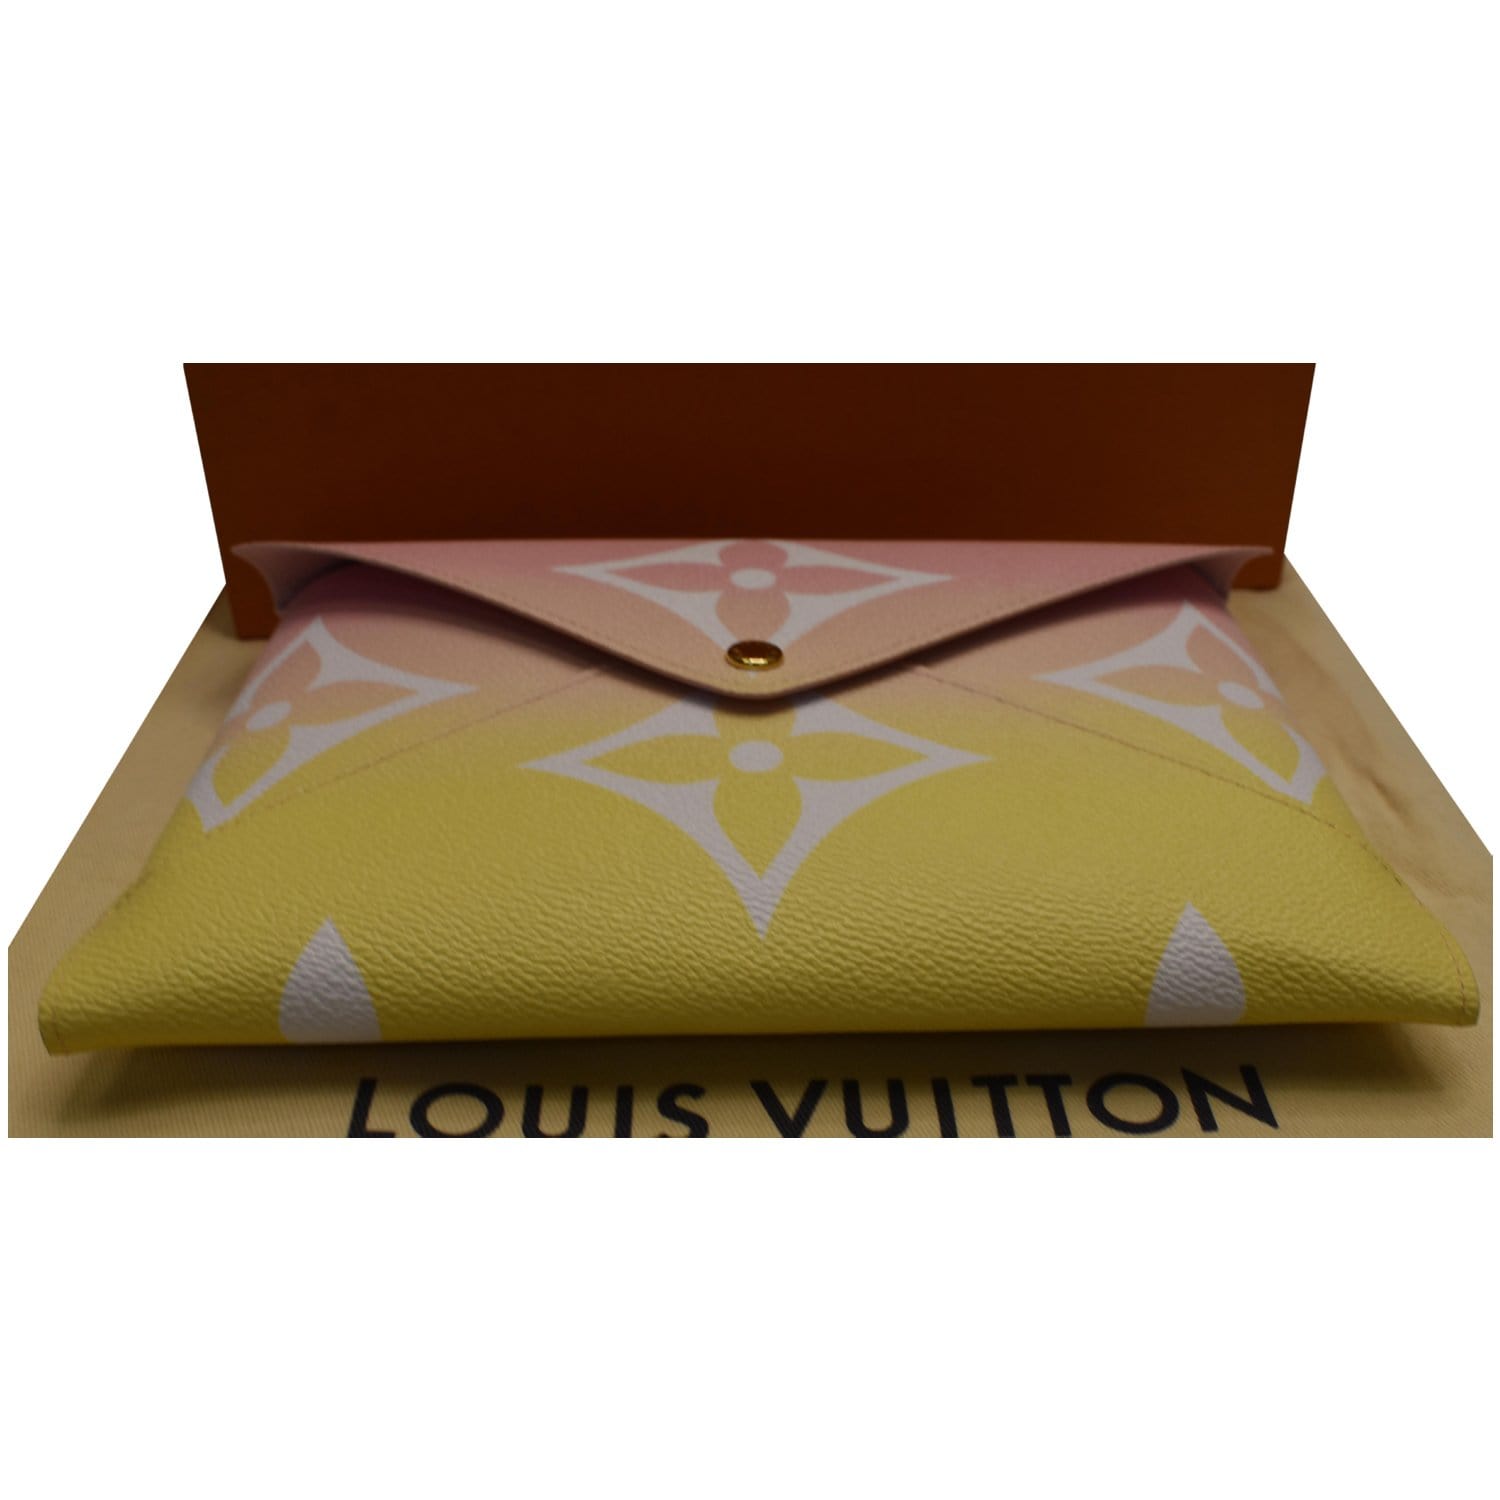 Used louis vuitton GIANT BY THE POOL KIRIGAMI POCHETTE SET HANDBAGS  HANDBAGS / LARGE - LEATHER